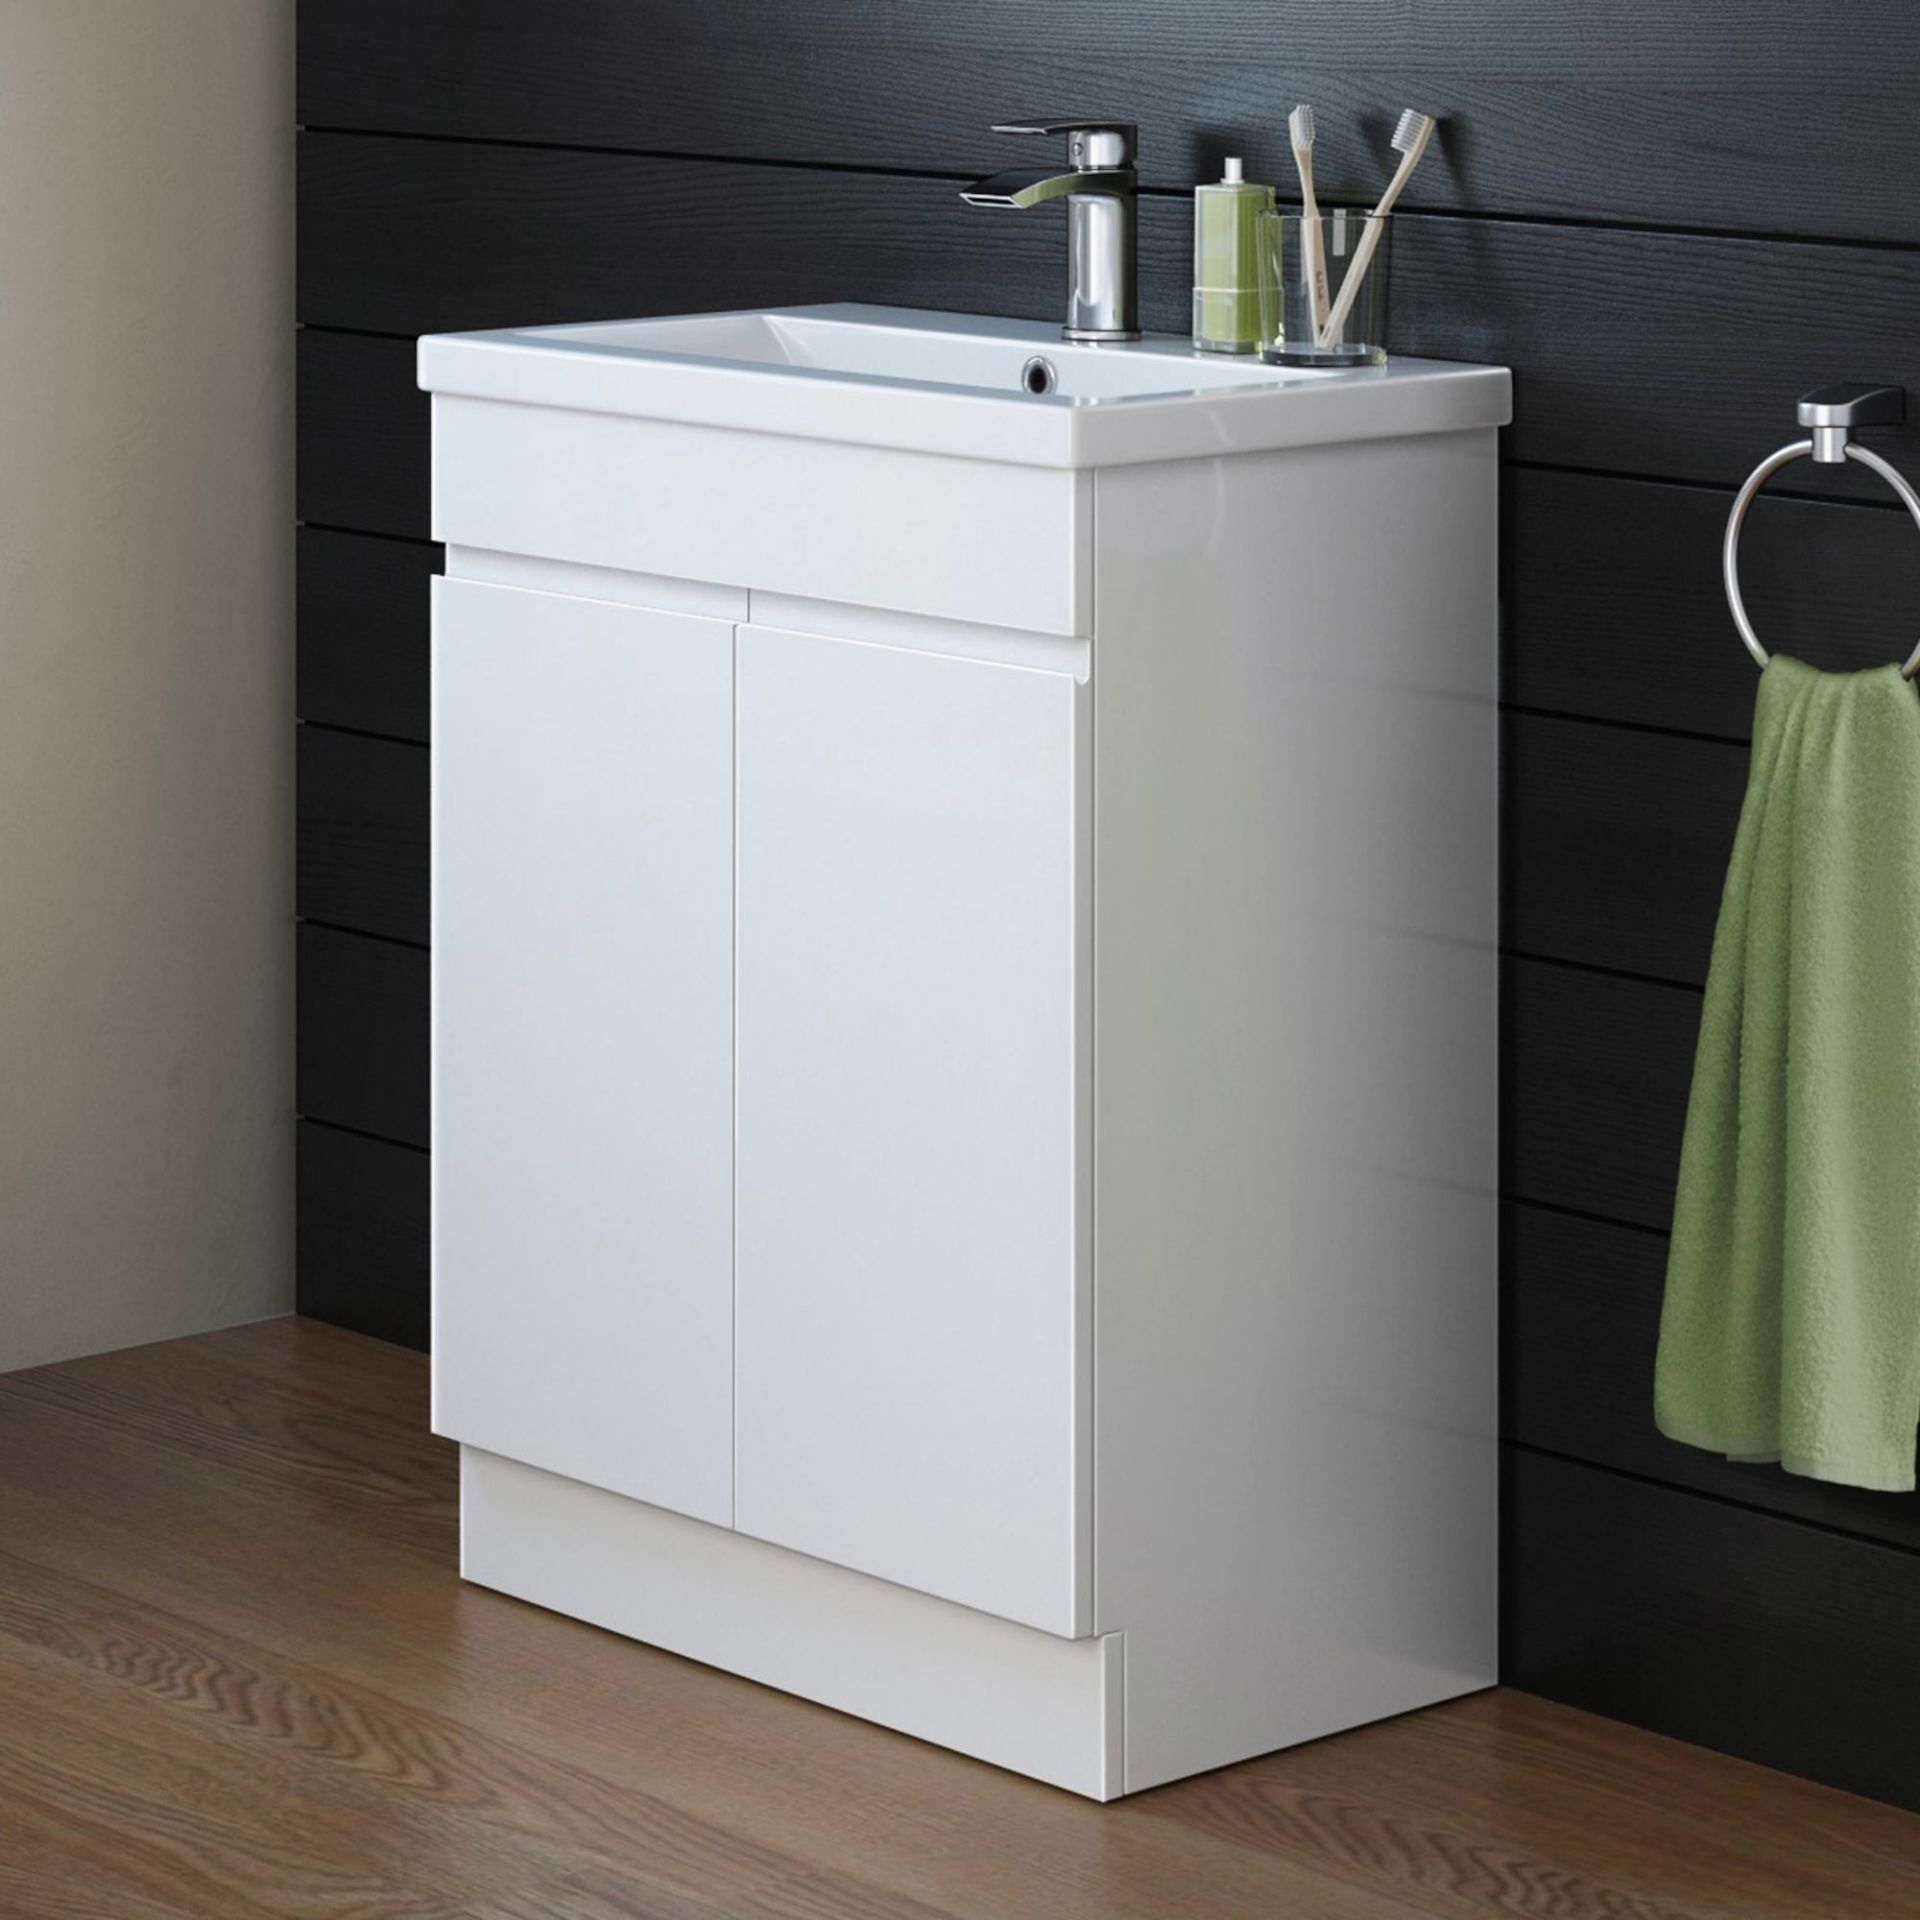 600mm Trent Gloss White Sink Cabinet - Floor Standing.RRP £499.99. Comes complete with basin. ...